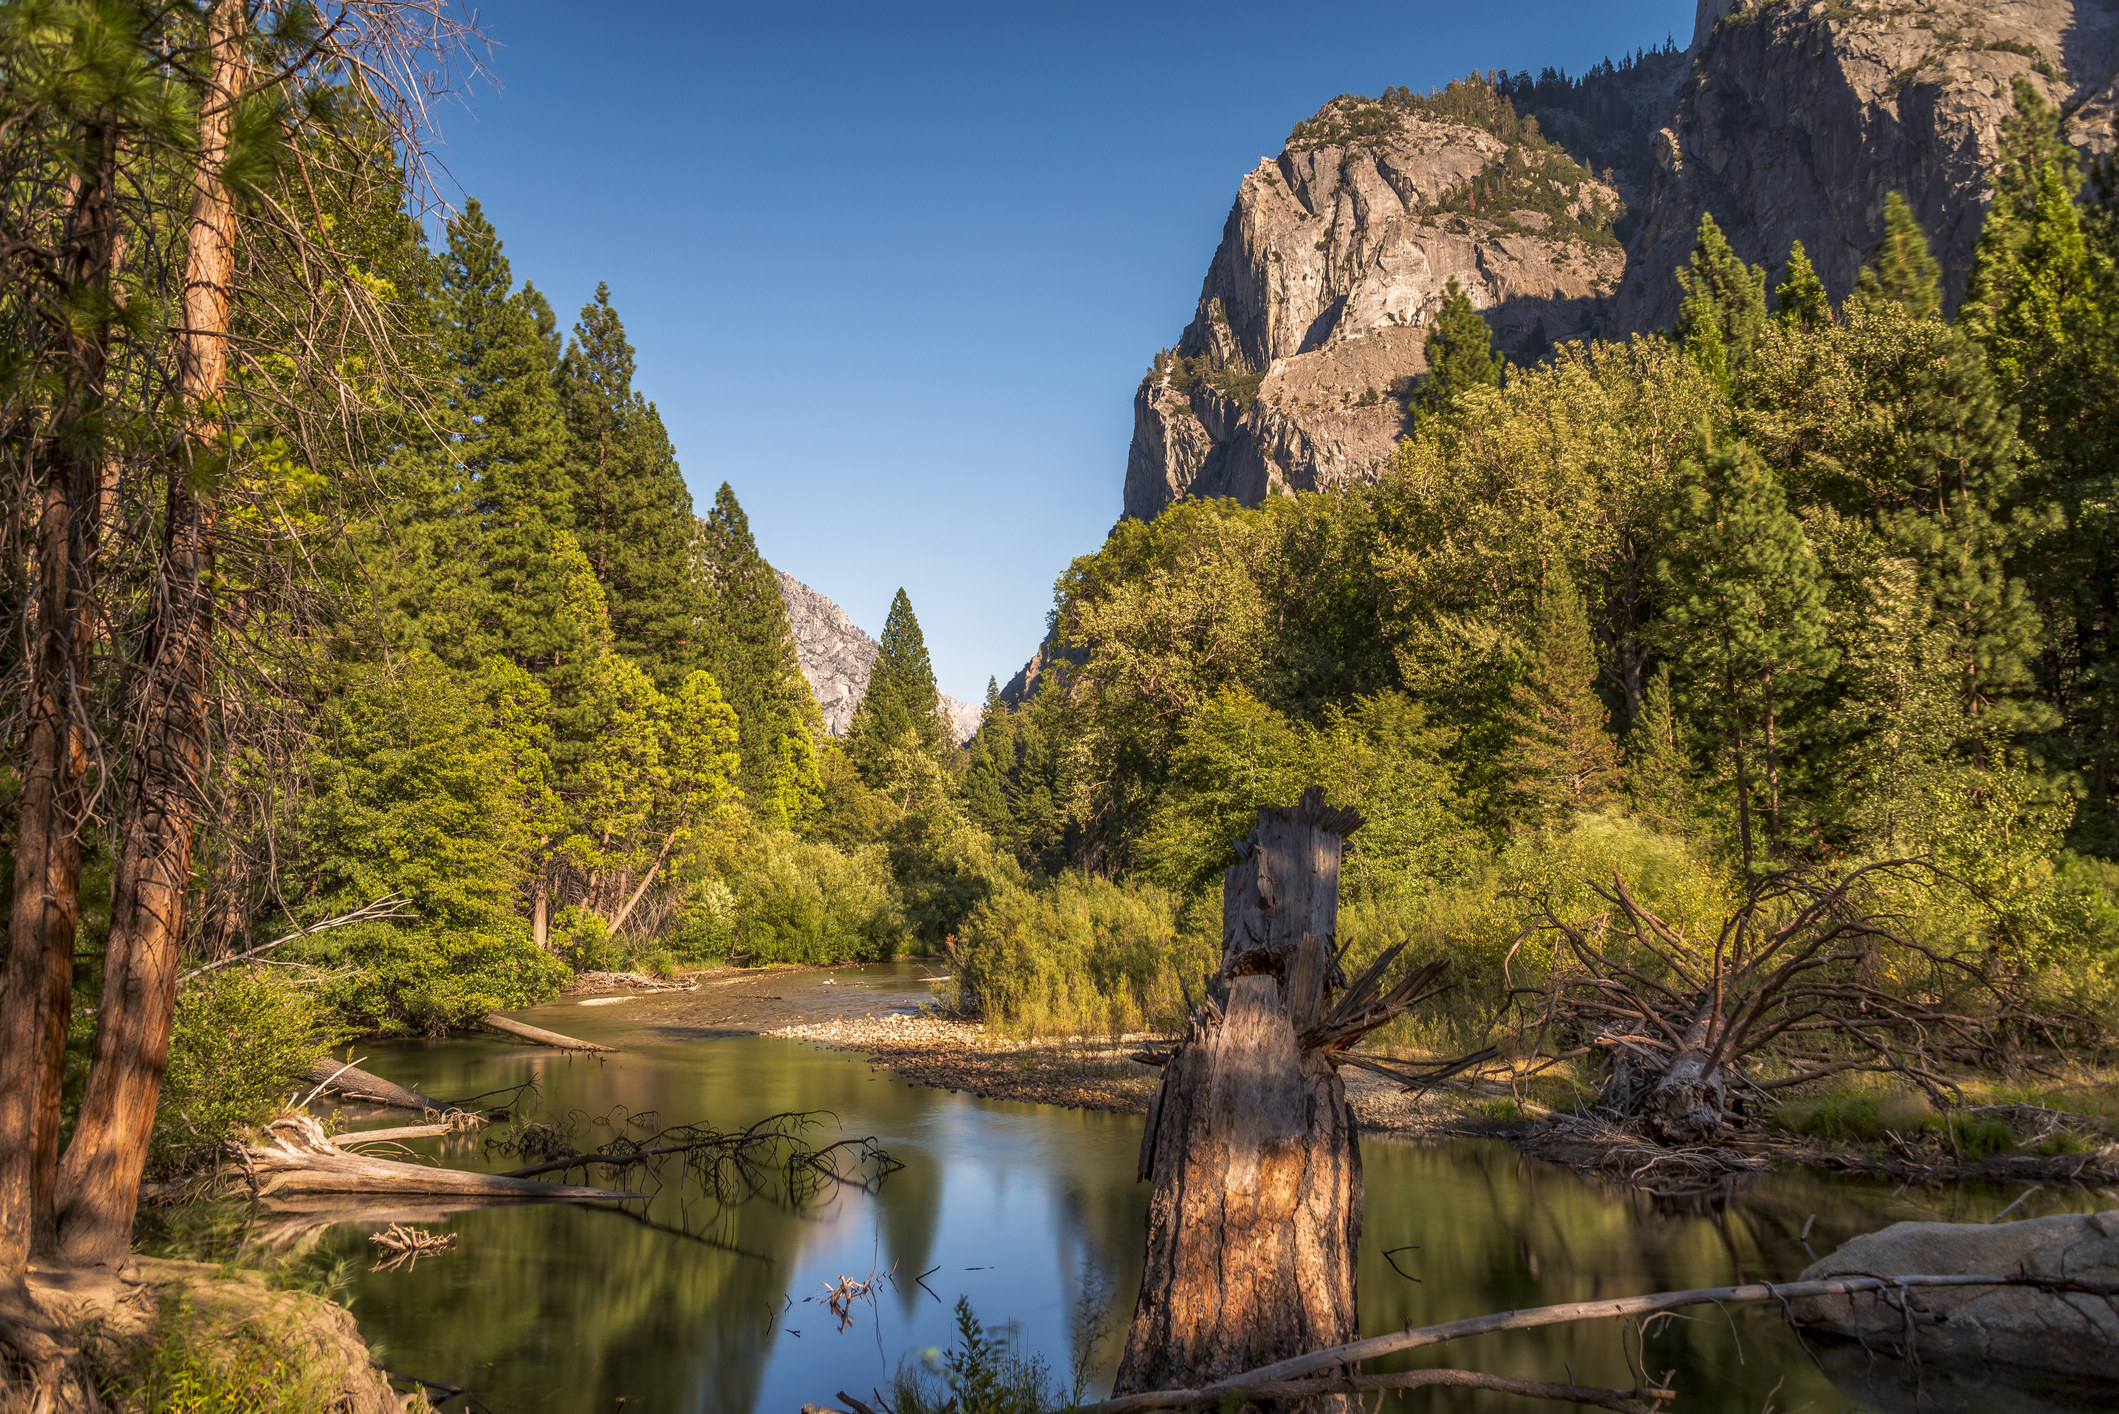 A scenic lake in Kings Canyon National Park.